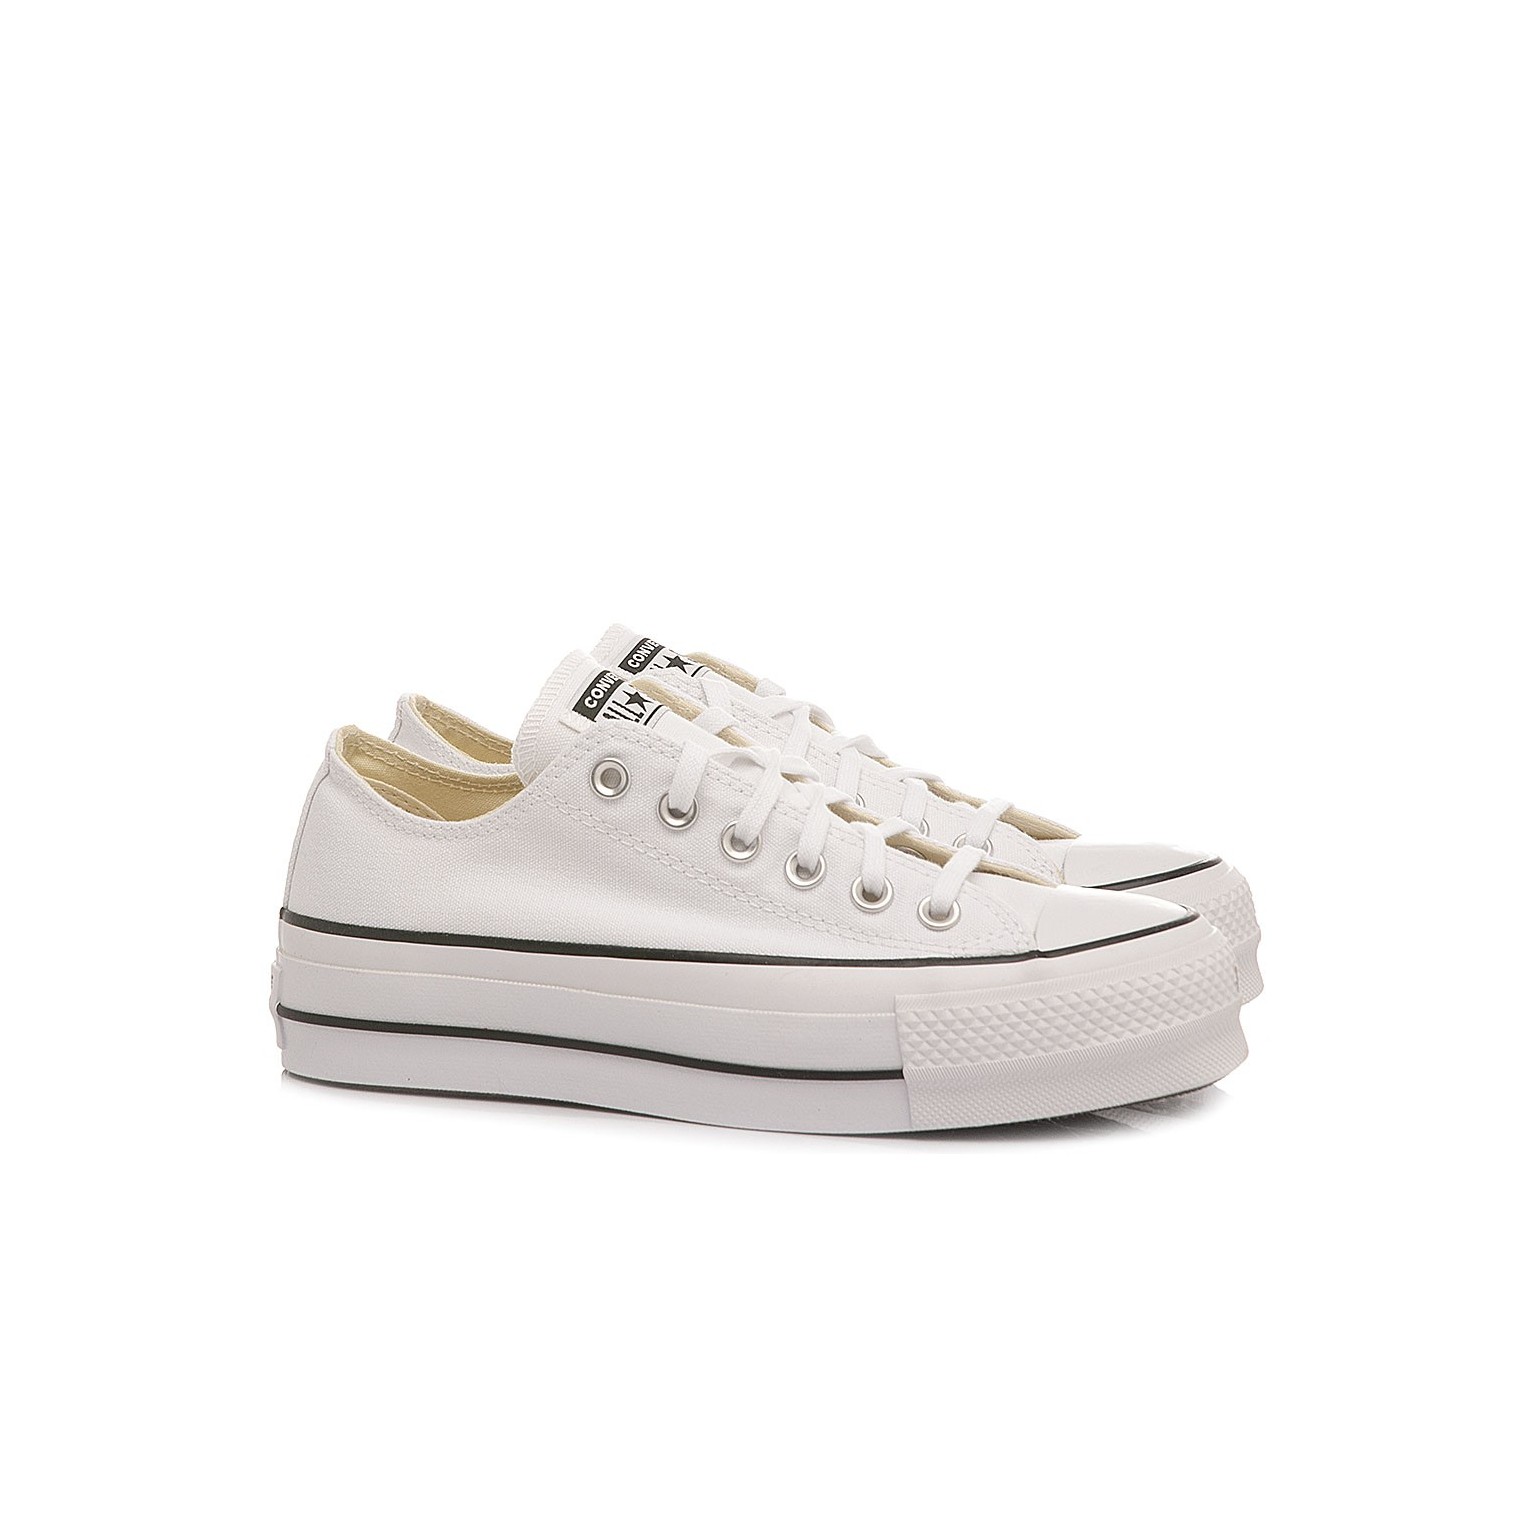 Converse All Star Sneakers Basse Donna CTAS Lift OX 560251C مساج ظهر